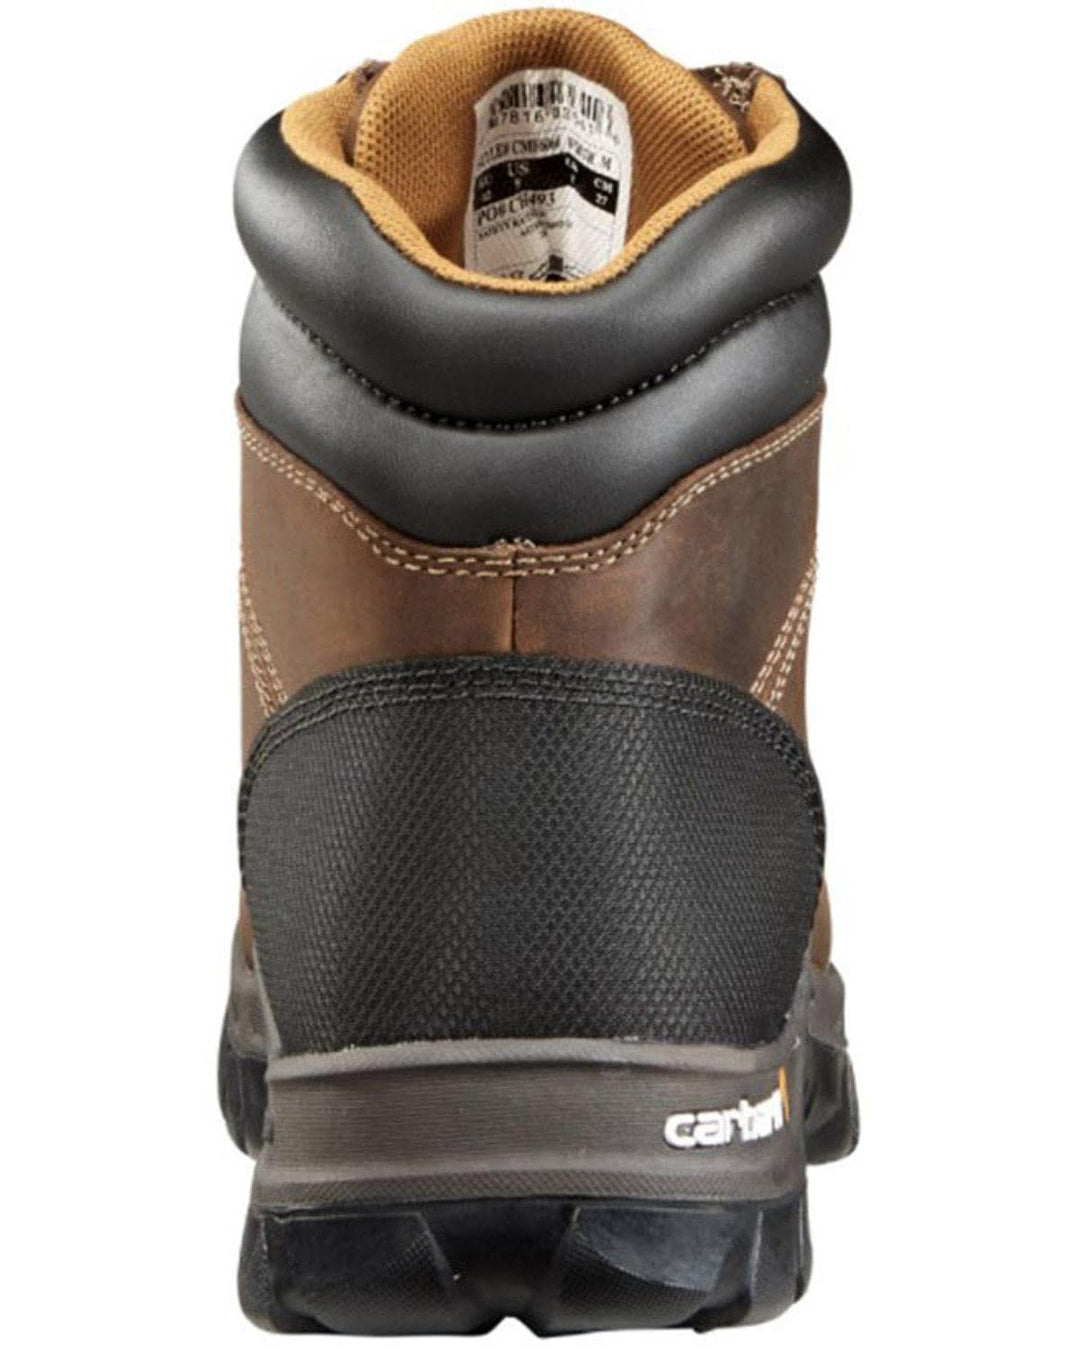 Carhartt Men's Rugged Flex 6" Comp Toe Work Boot, Brown Oil Tanned Leather, 10